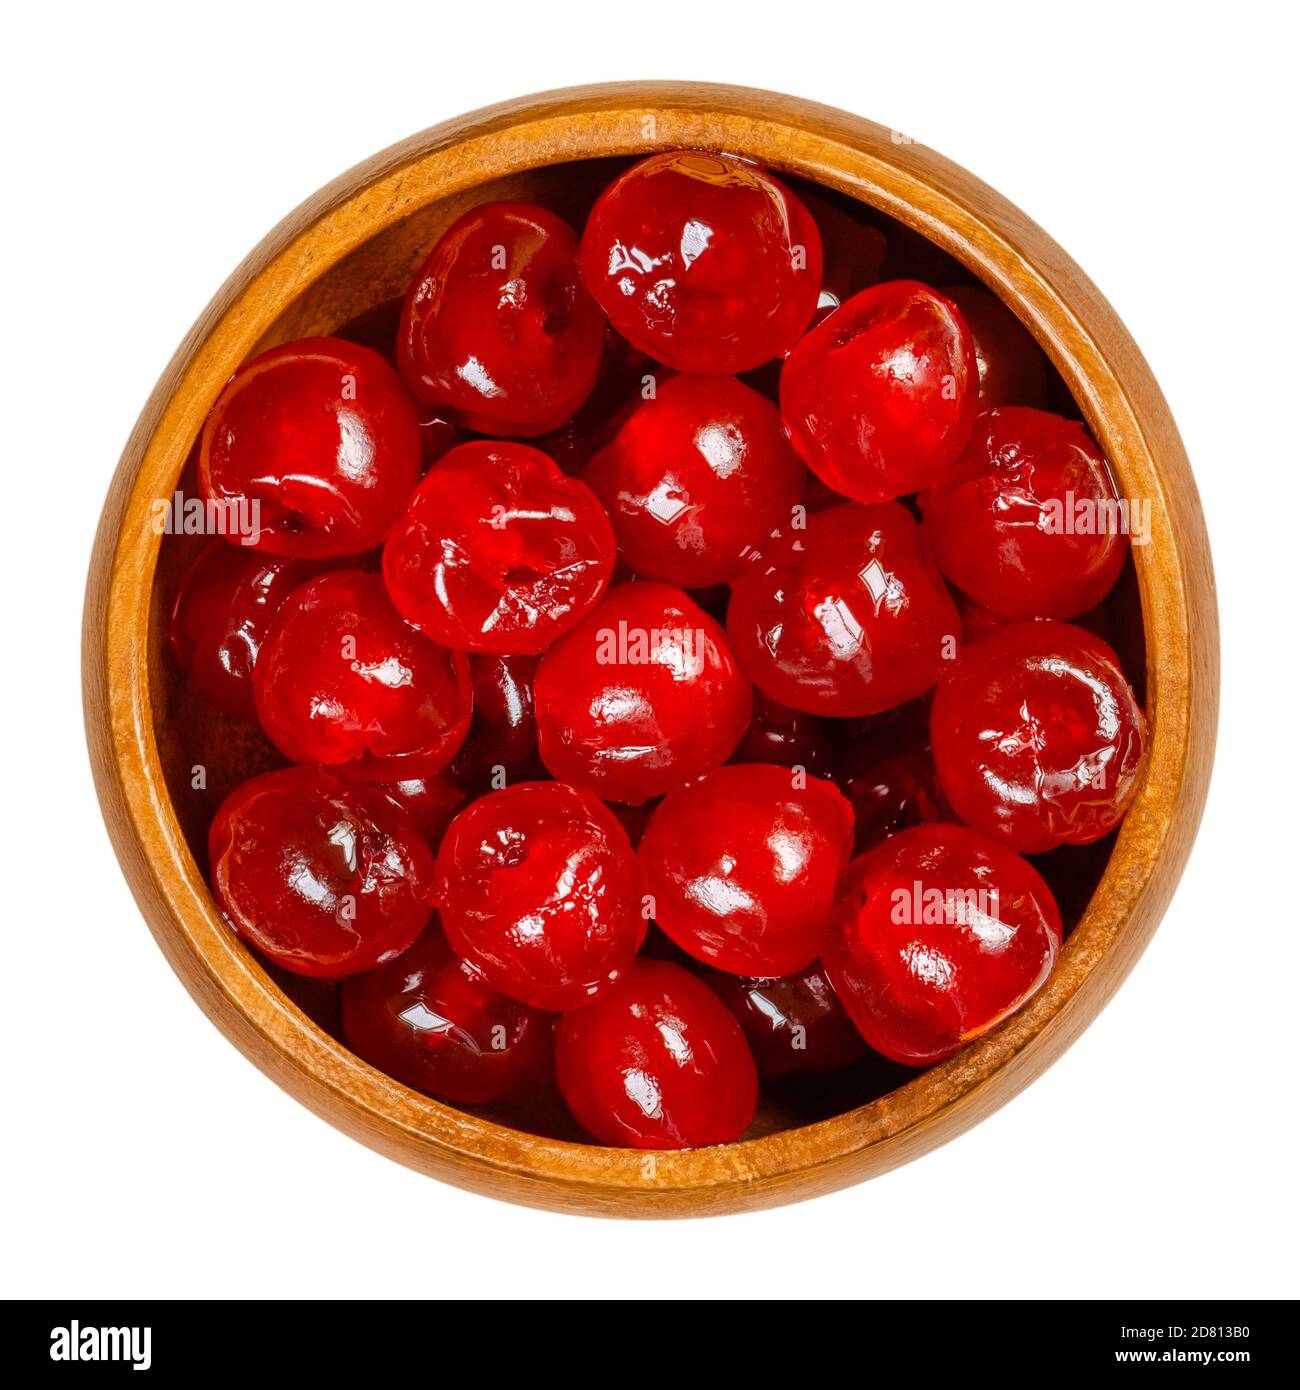 Maraschino cherries in a wooden bowl. Also cocktail cherries, whole red fruits of Prunus avium, preserved and sweetened in sugar syrup. Stock Photo